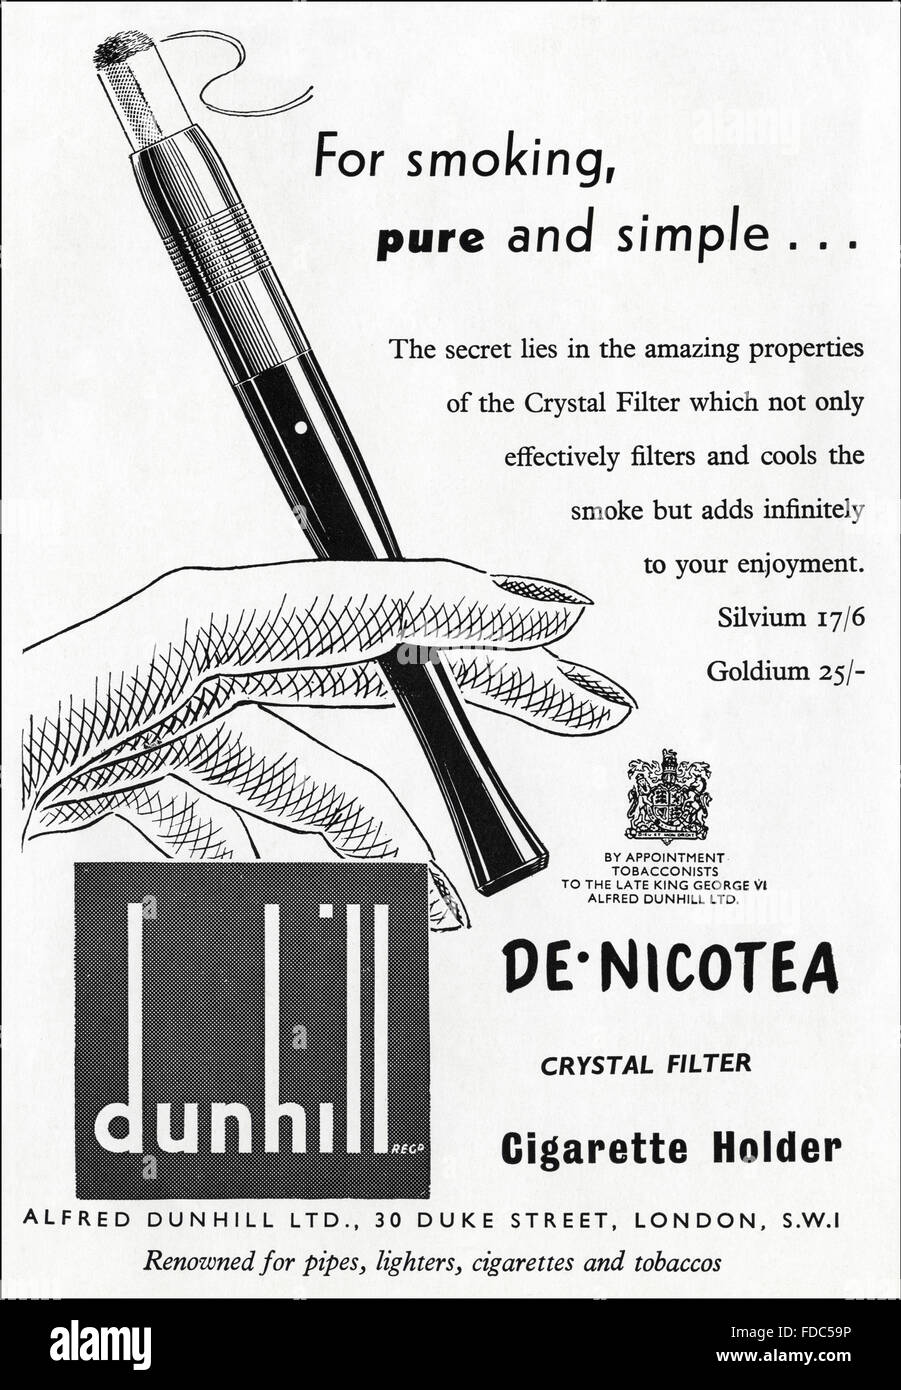 Original vintage advert from 1950s. Advertisement from 1954 advertising Dunhill cigarette holder. Stock Photo